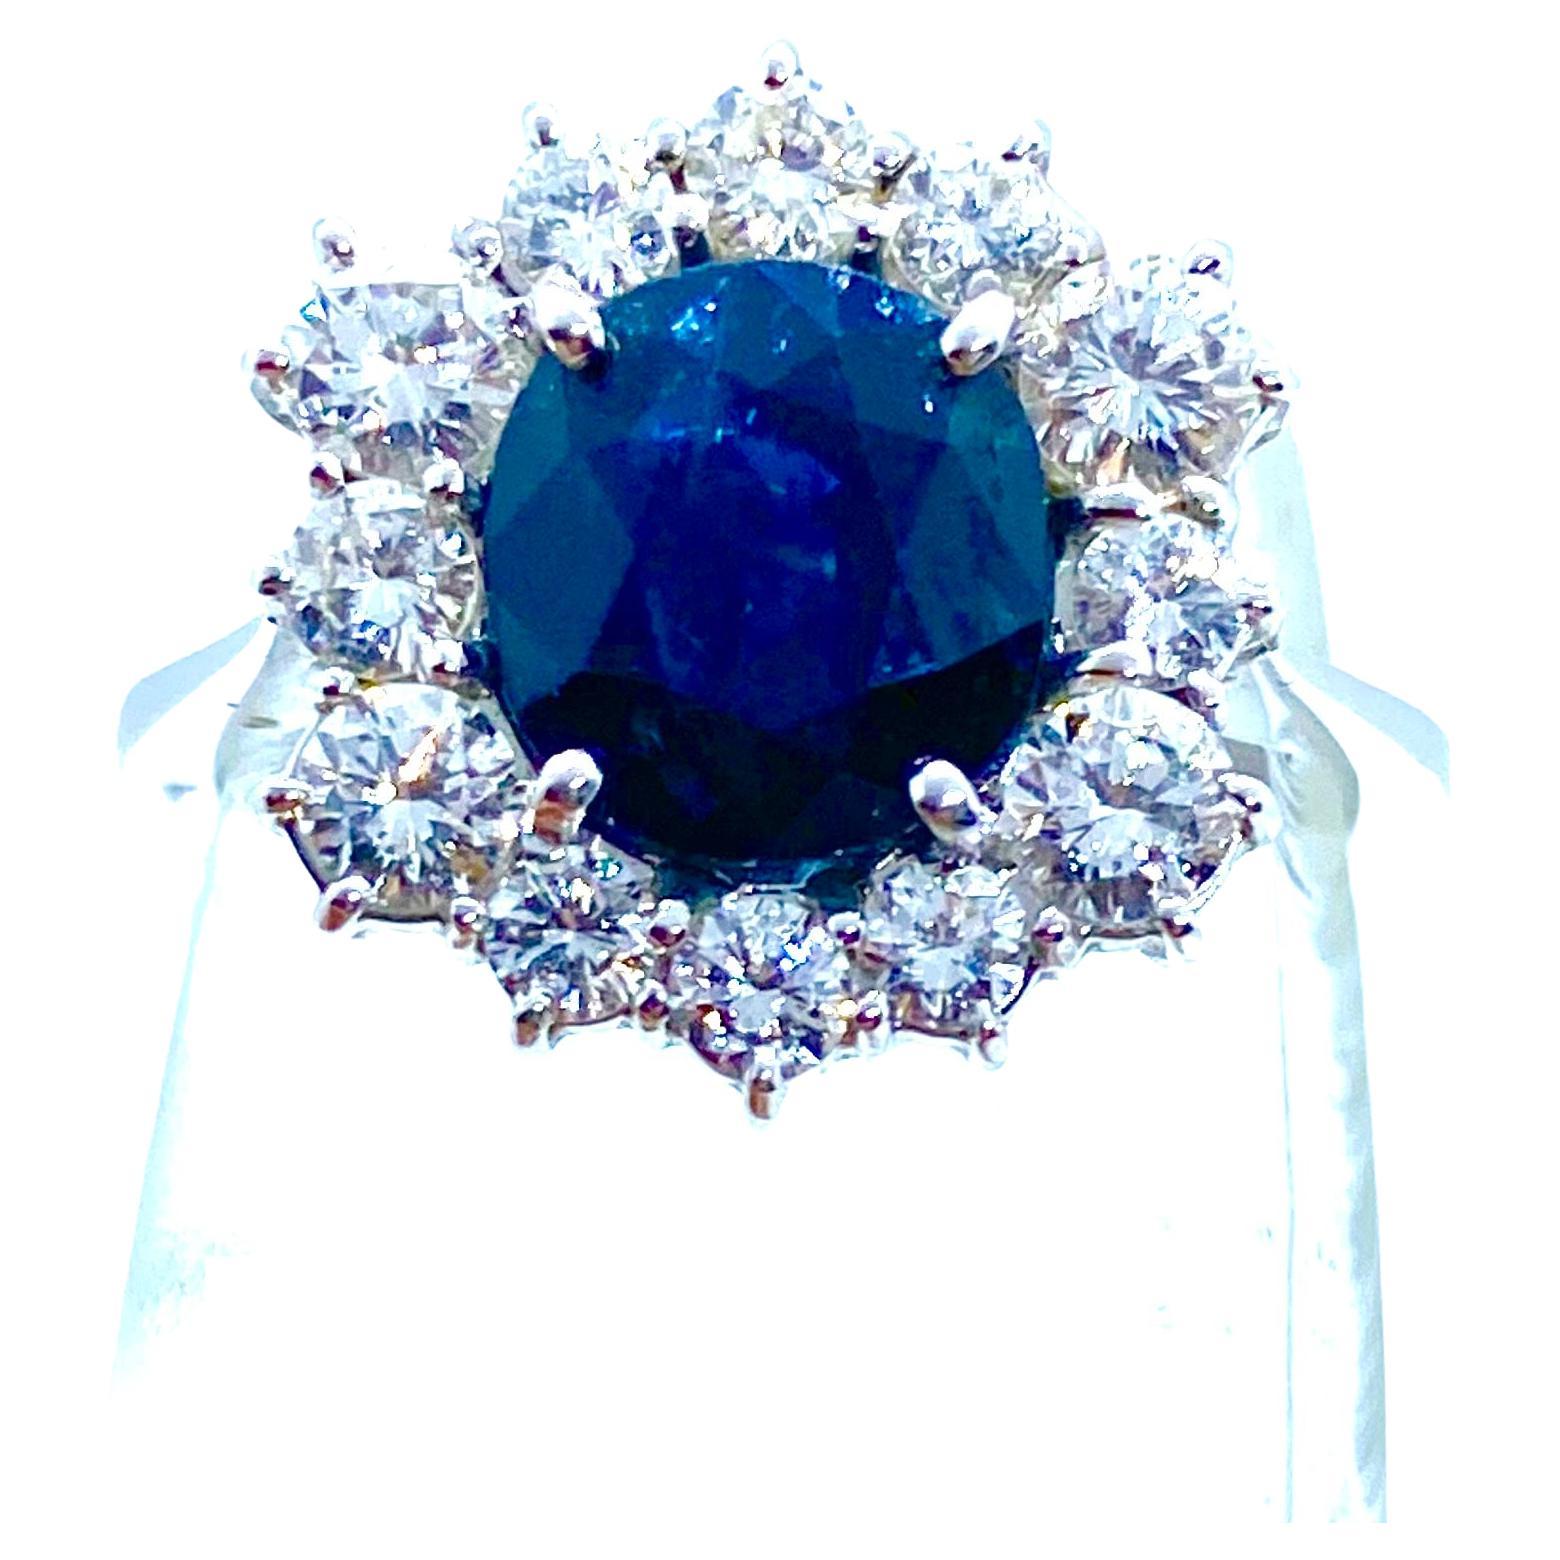 Hexagonal ring with a natural round sapphire (2,60 ct) in the center, surrounded by 12 natural brilliant cut diamonds, weighing ct. 1,35 total.
18K white gold.
Italian production of the second half of the 20th century
